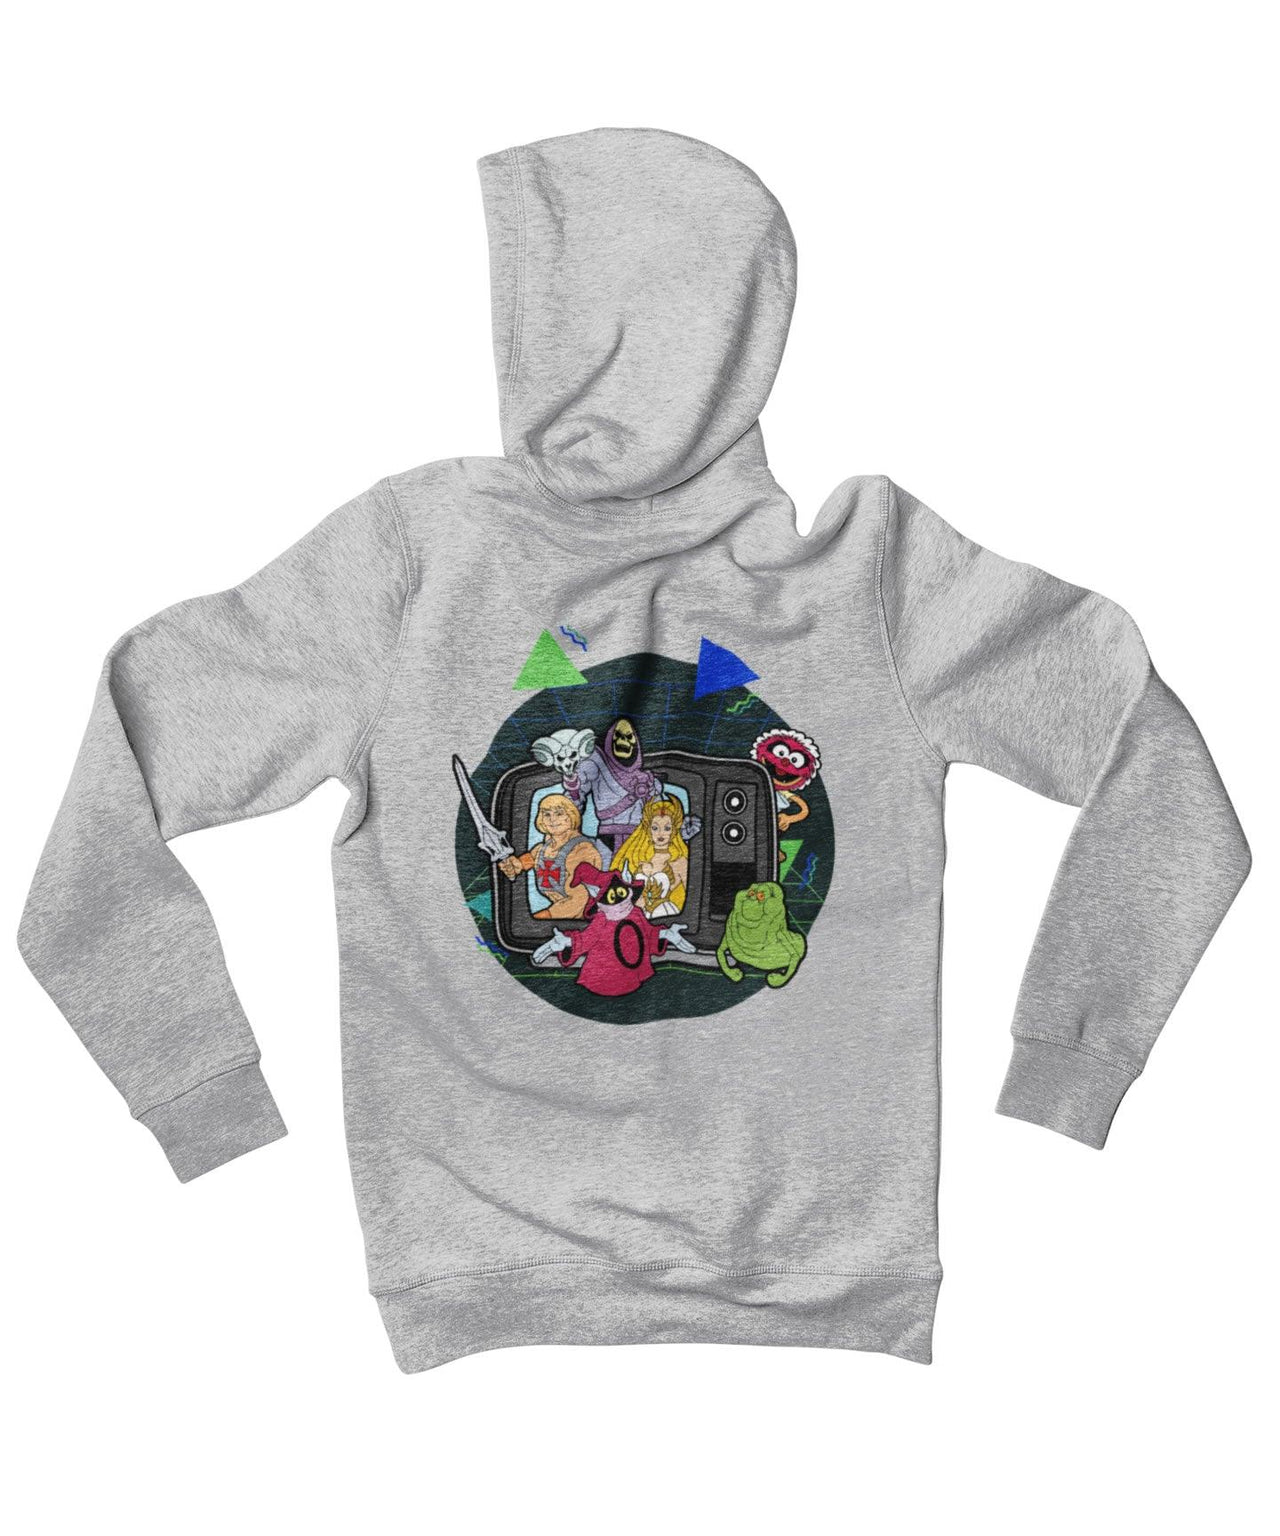 Top Notchy TV Toon Number 3 Back Printed Hoodie For Men and Women 8Ball